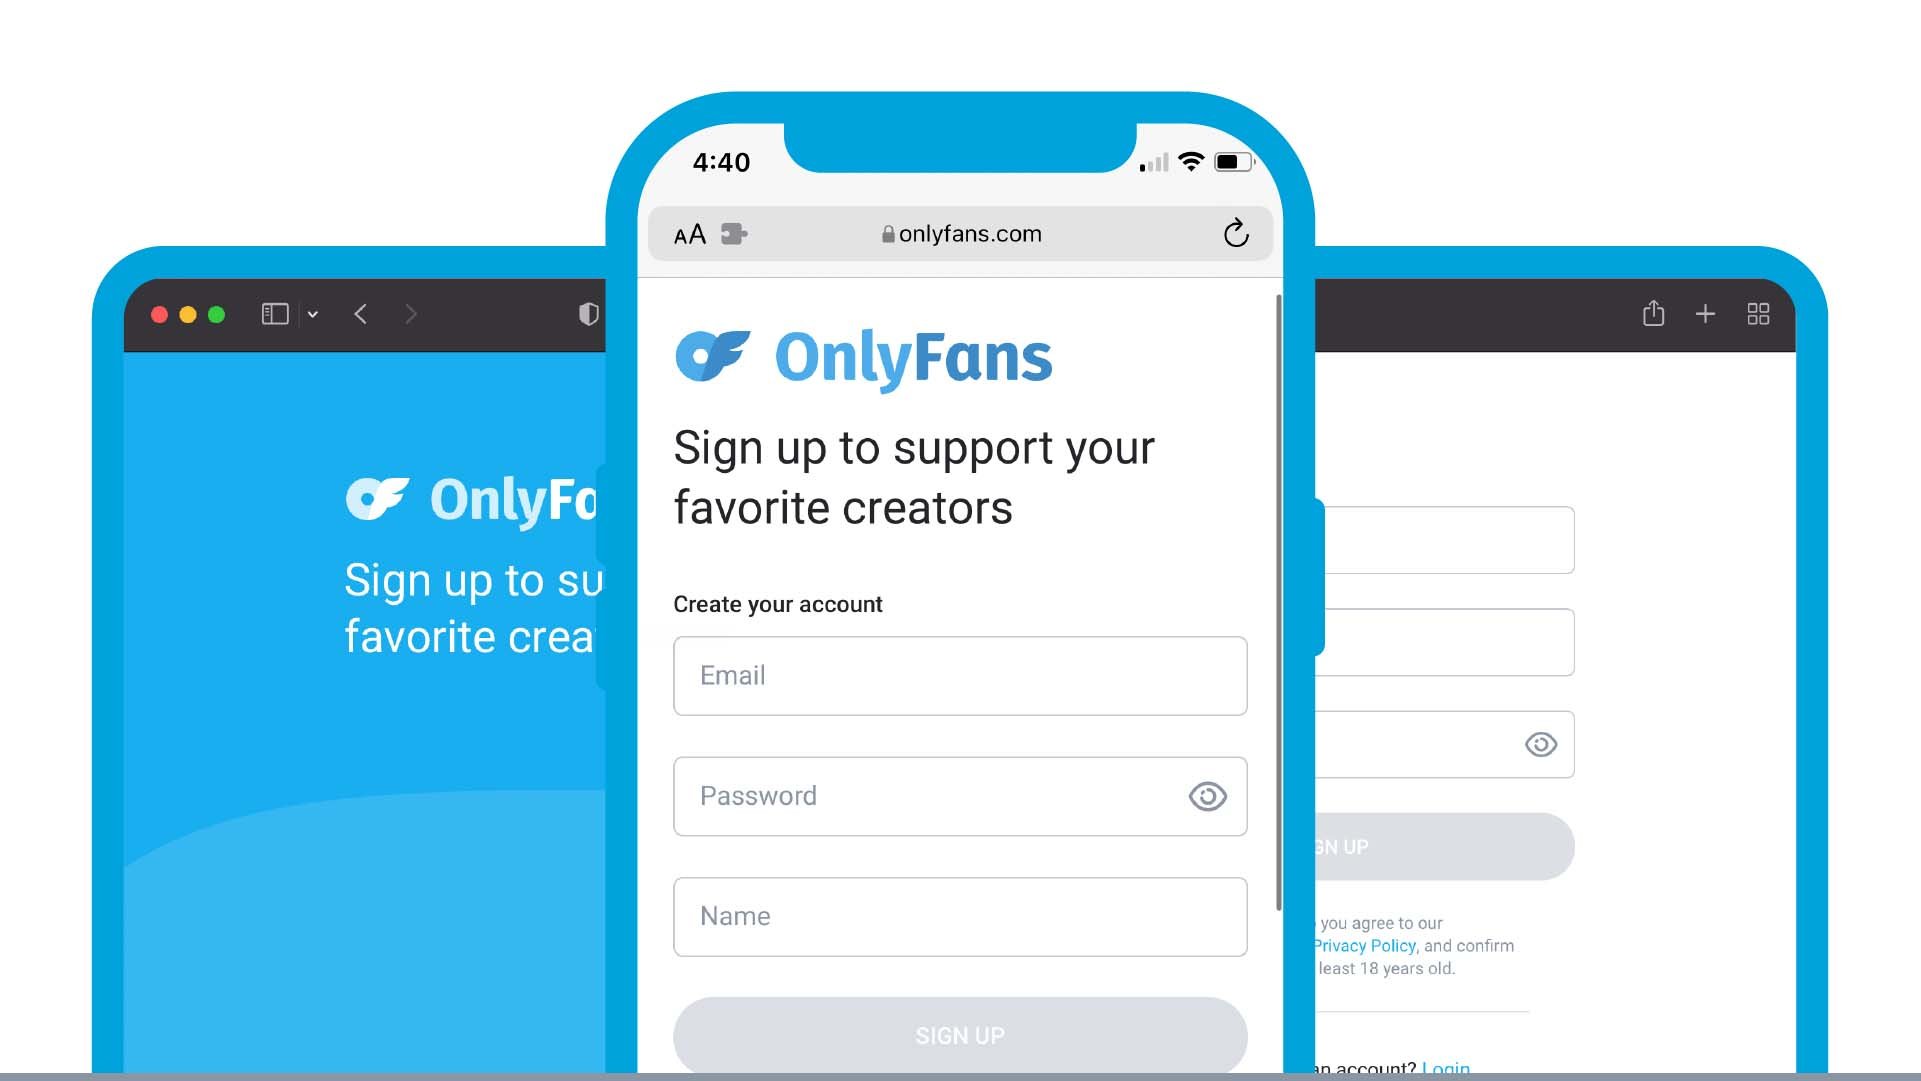 How To Search For Accounts On Onlyfans